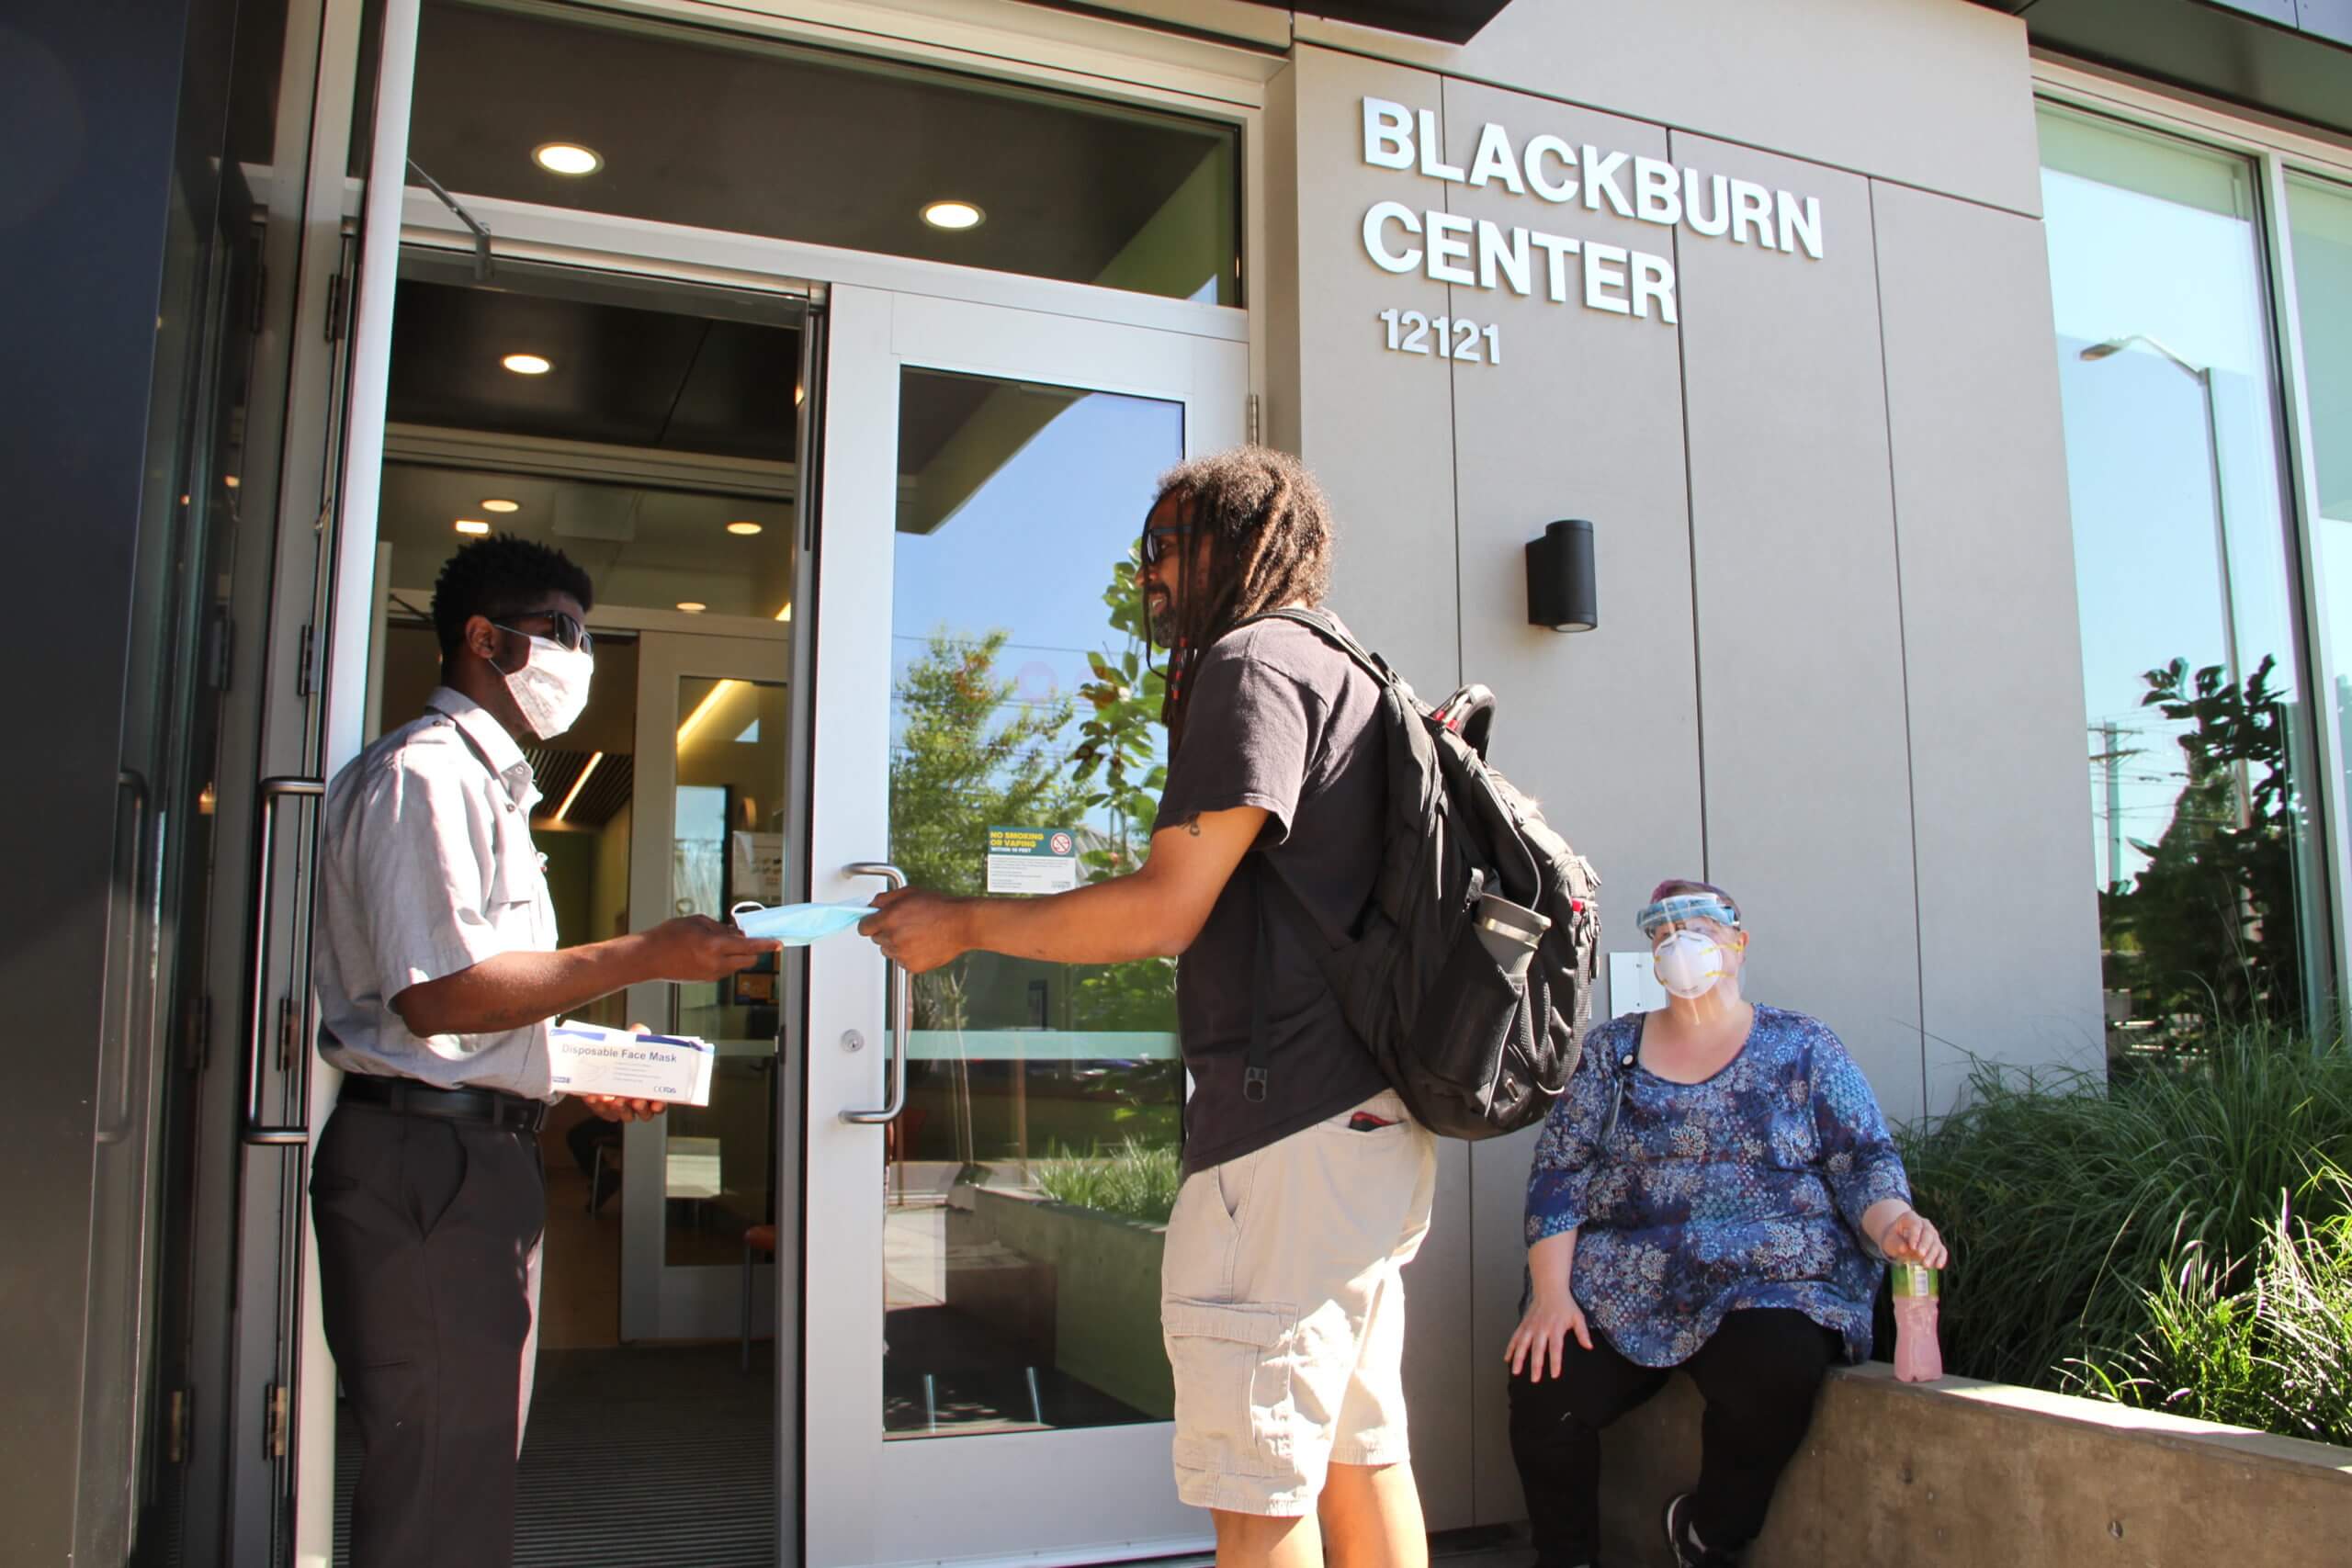 Person holding door open for individual while also handing them a mask as they enter blackburn center building